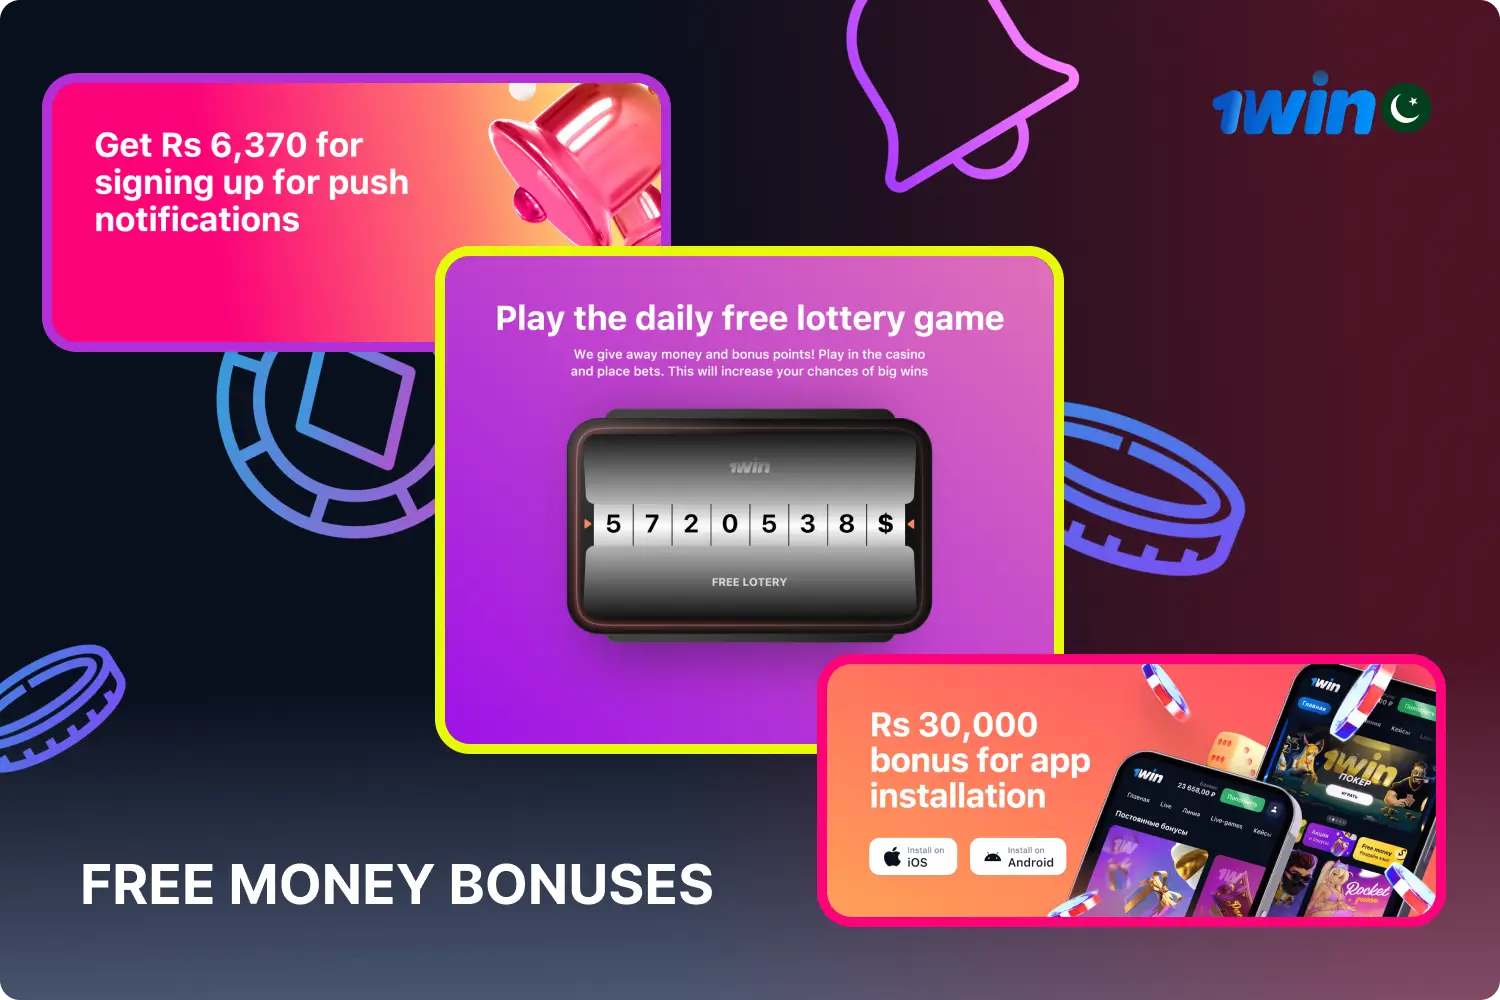 The 1win platform offers its players several pleasant free money bonuses